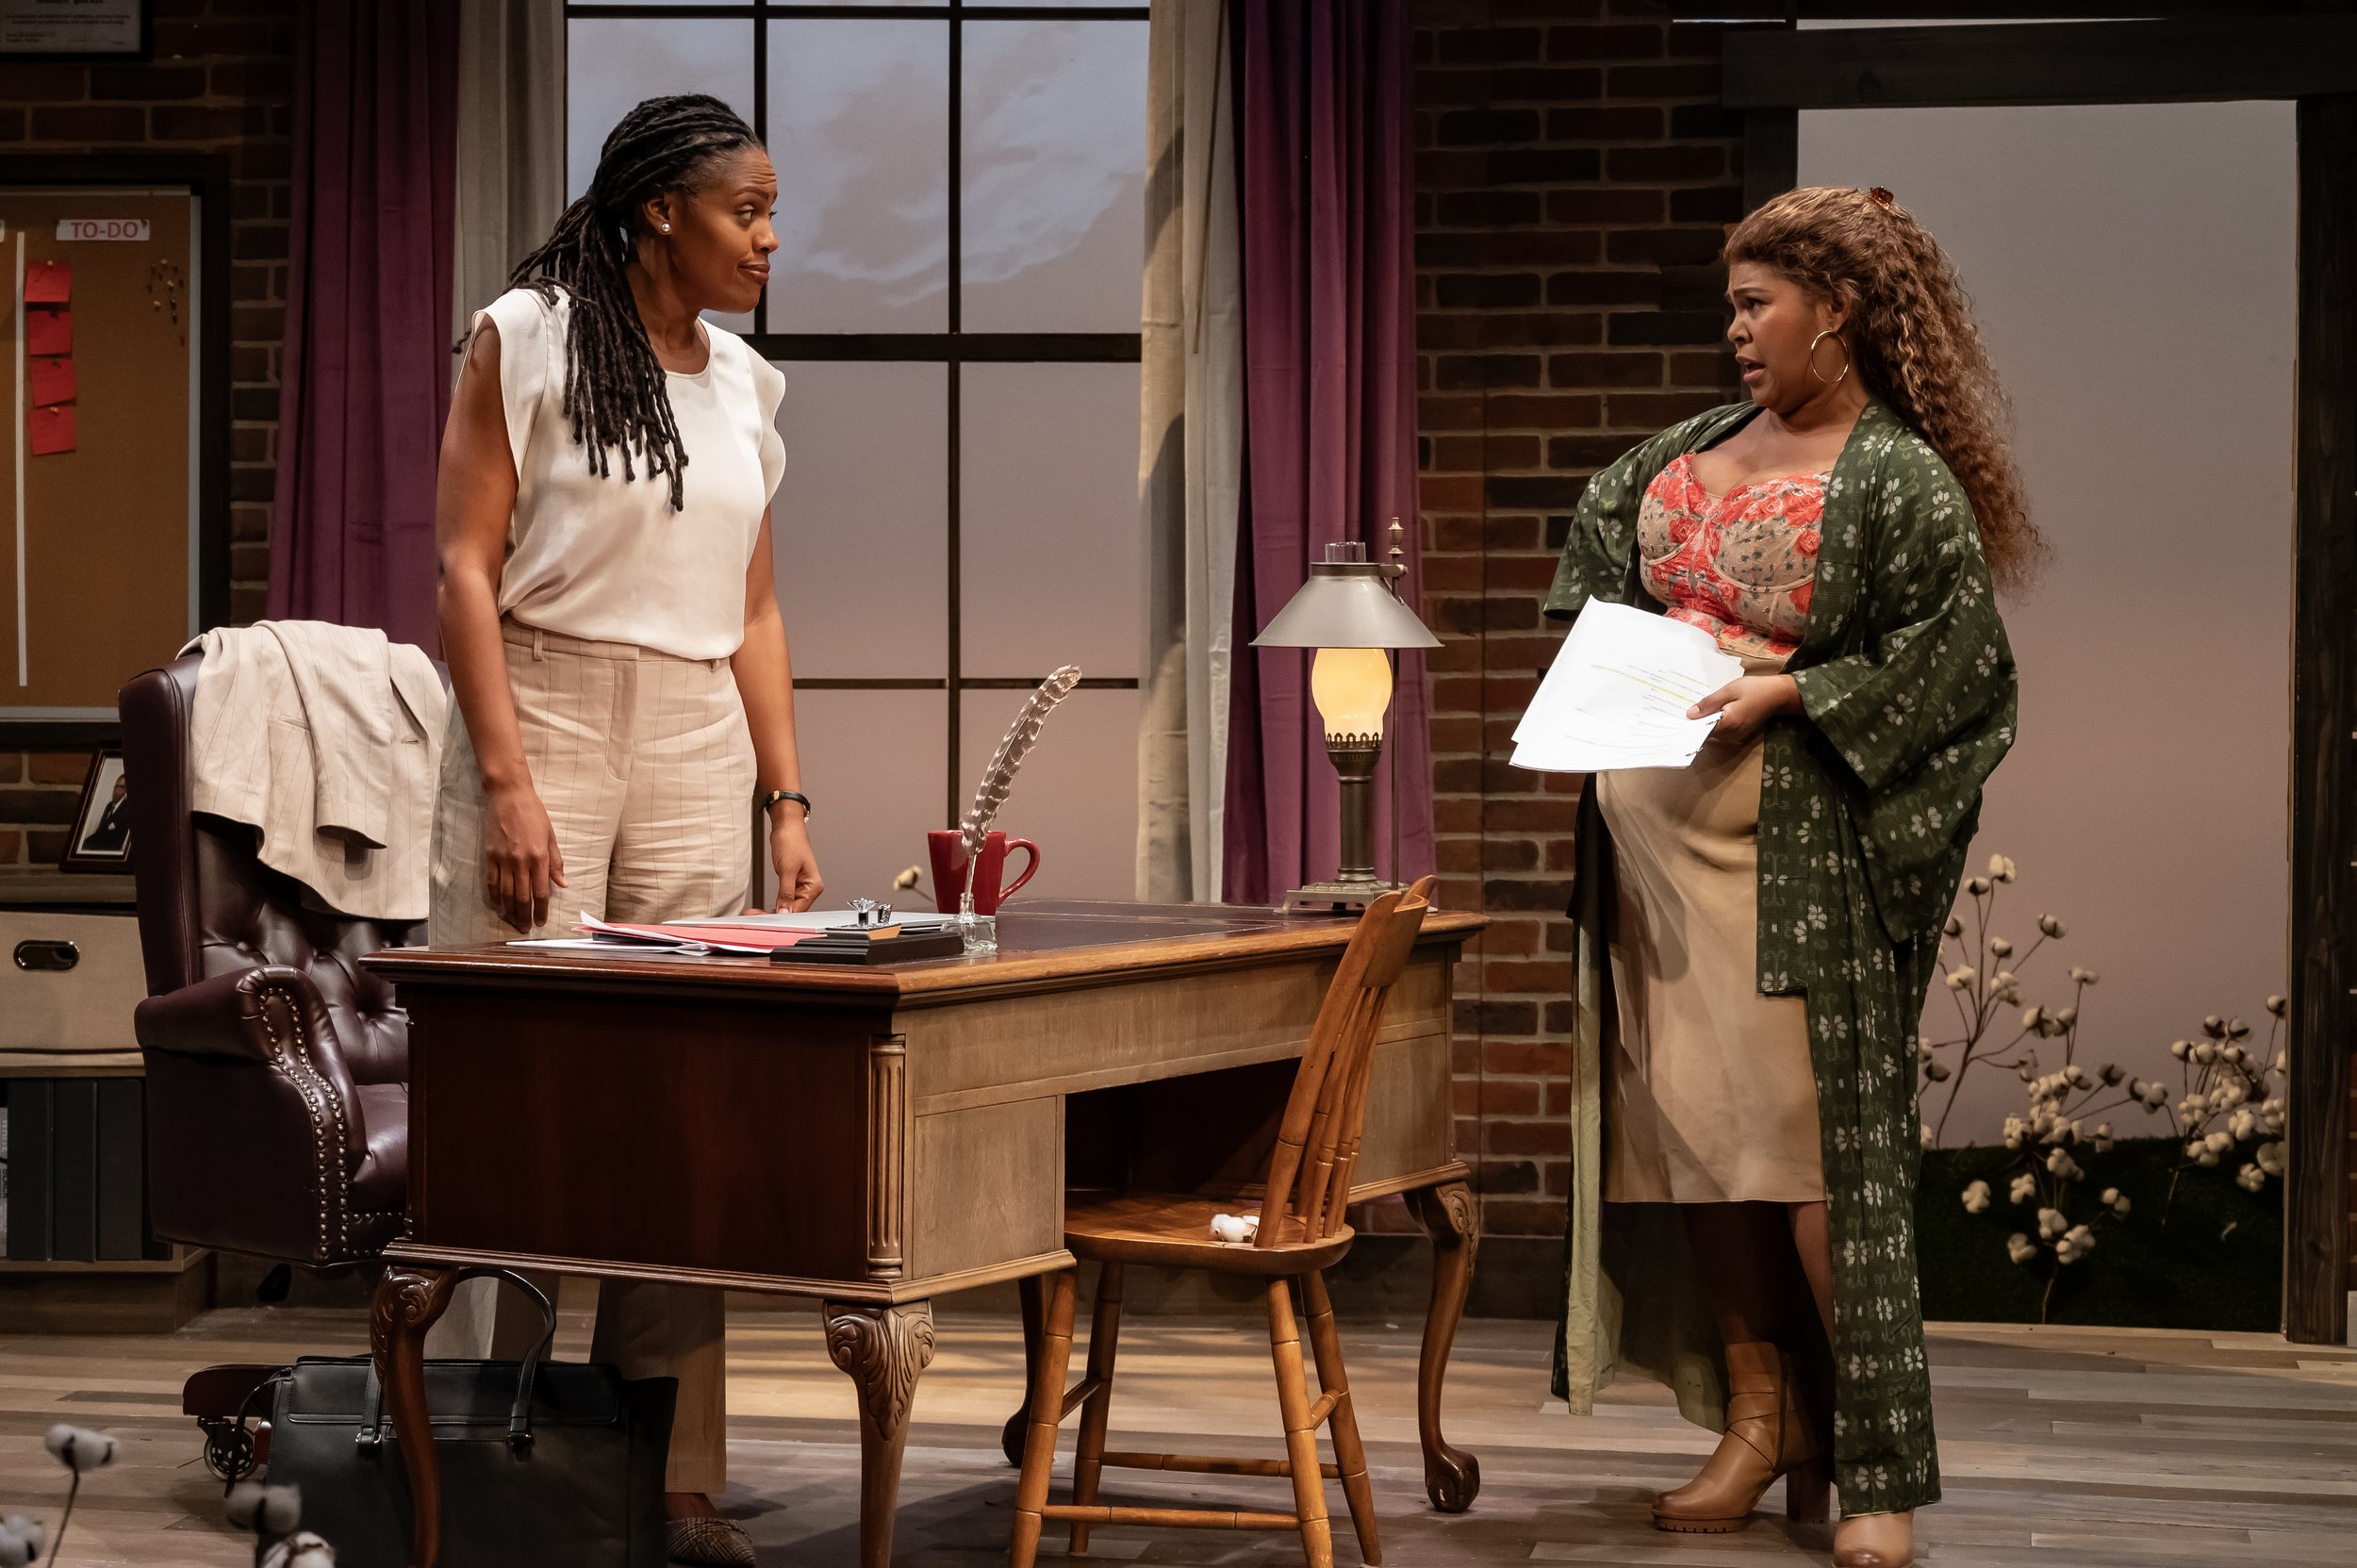   Nikkole Salter as Sandra and ​​Tamieka Chavis as Jade in Mosaic Theater’s production of  Confederates  by Dominique Morisseau. Photo by Chris Banks.  